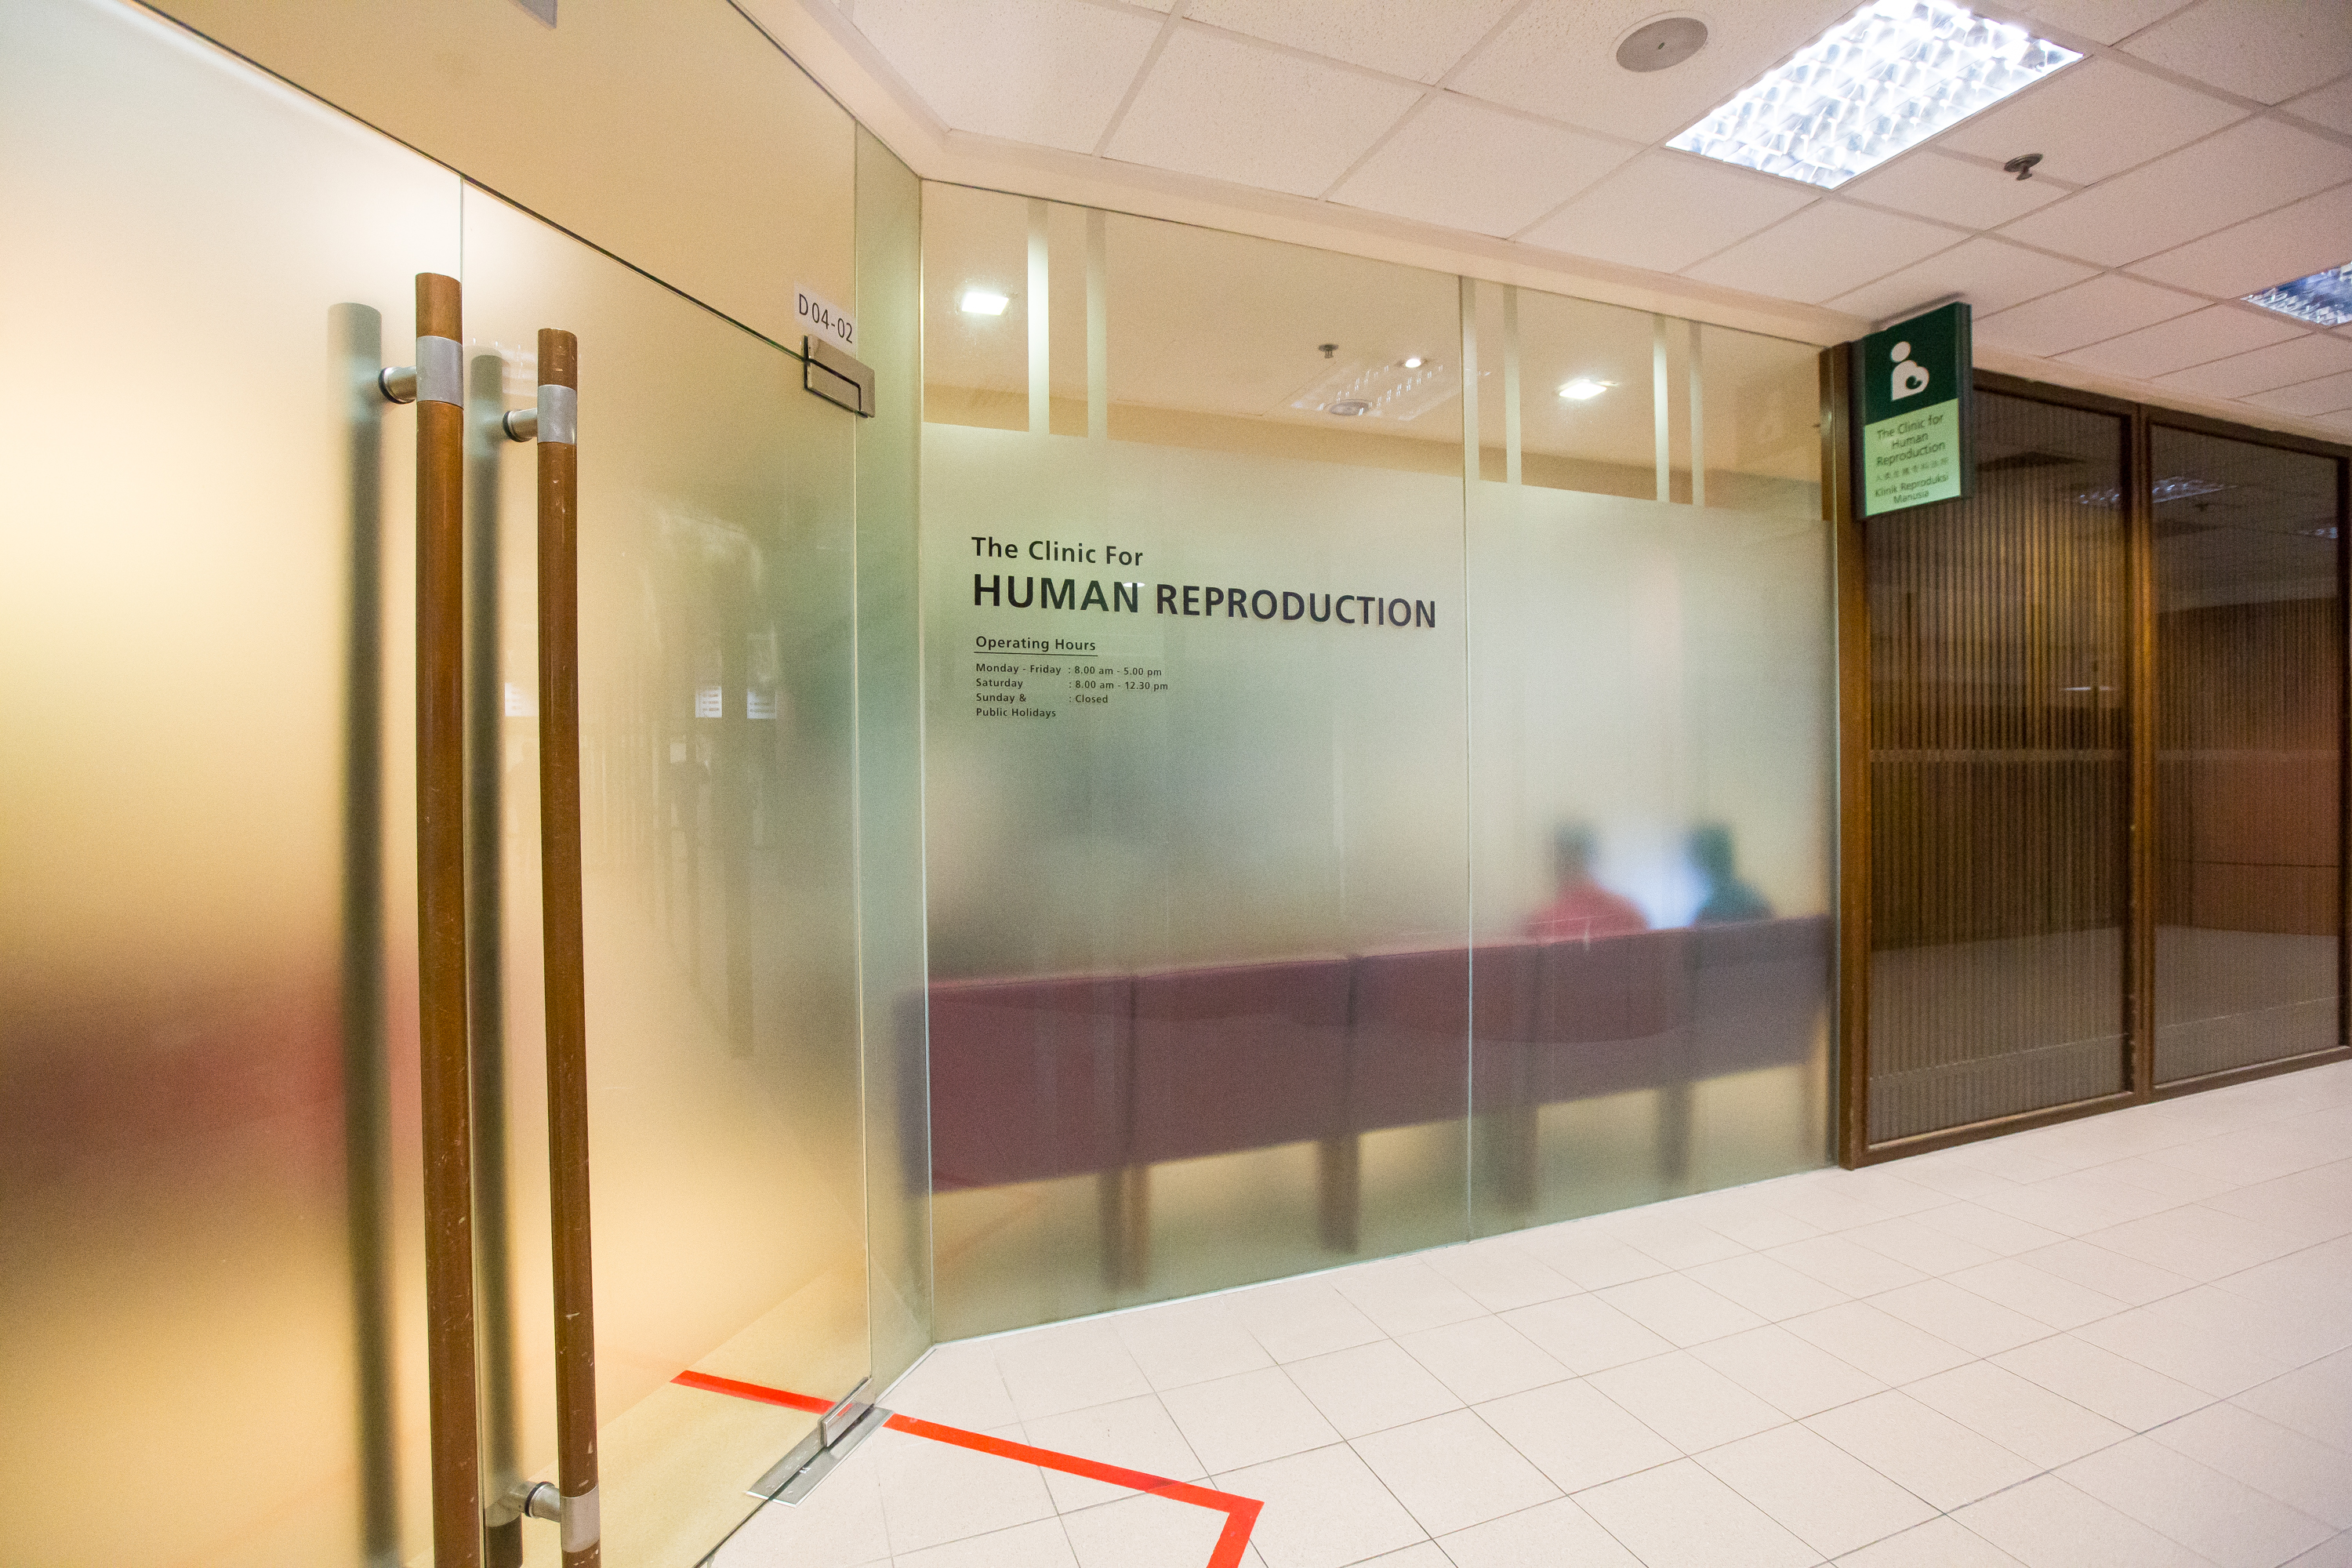 The Clinic for Human Reproduction